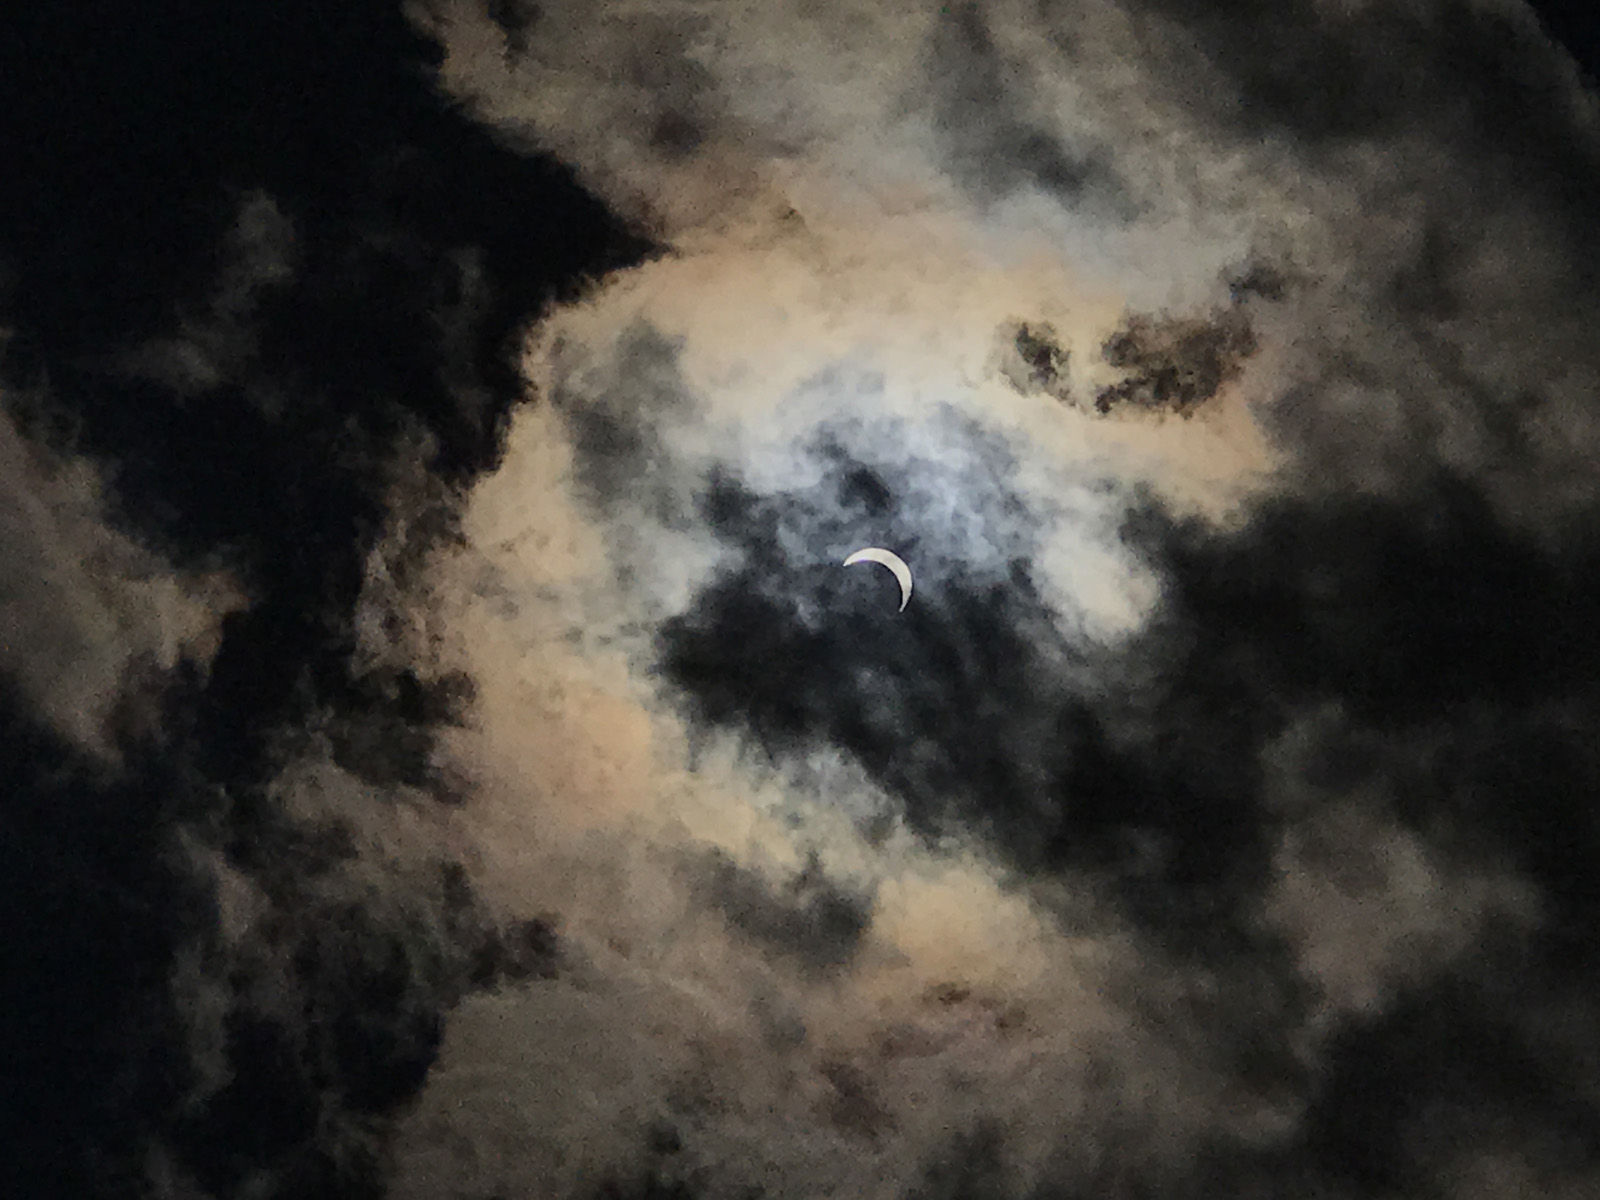 A view of the eclipse from Silver Spring, Maryland. The eclipse was about 80 percent totality in the D.C. area. (Courtesy Robert Orrison)